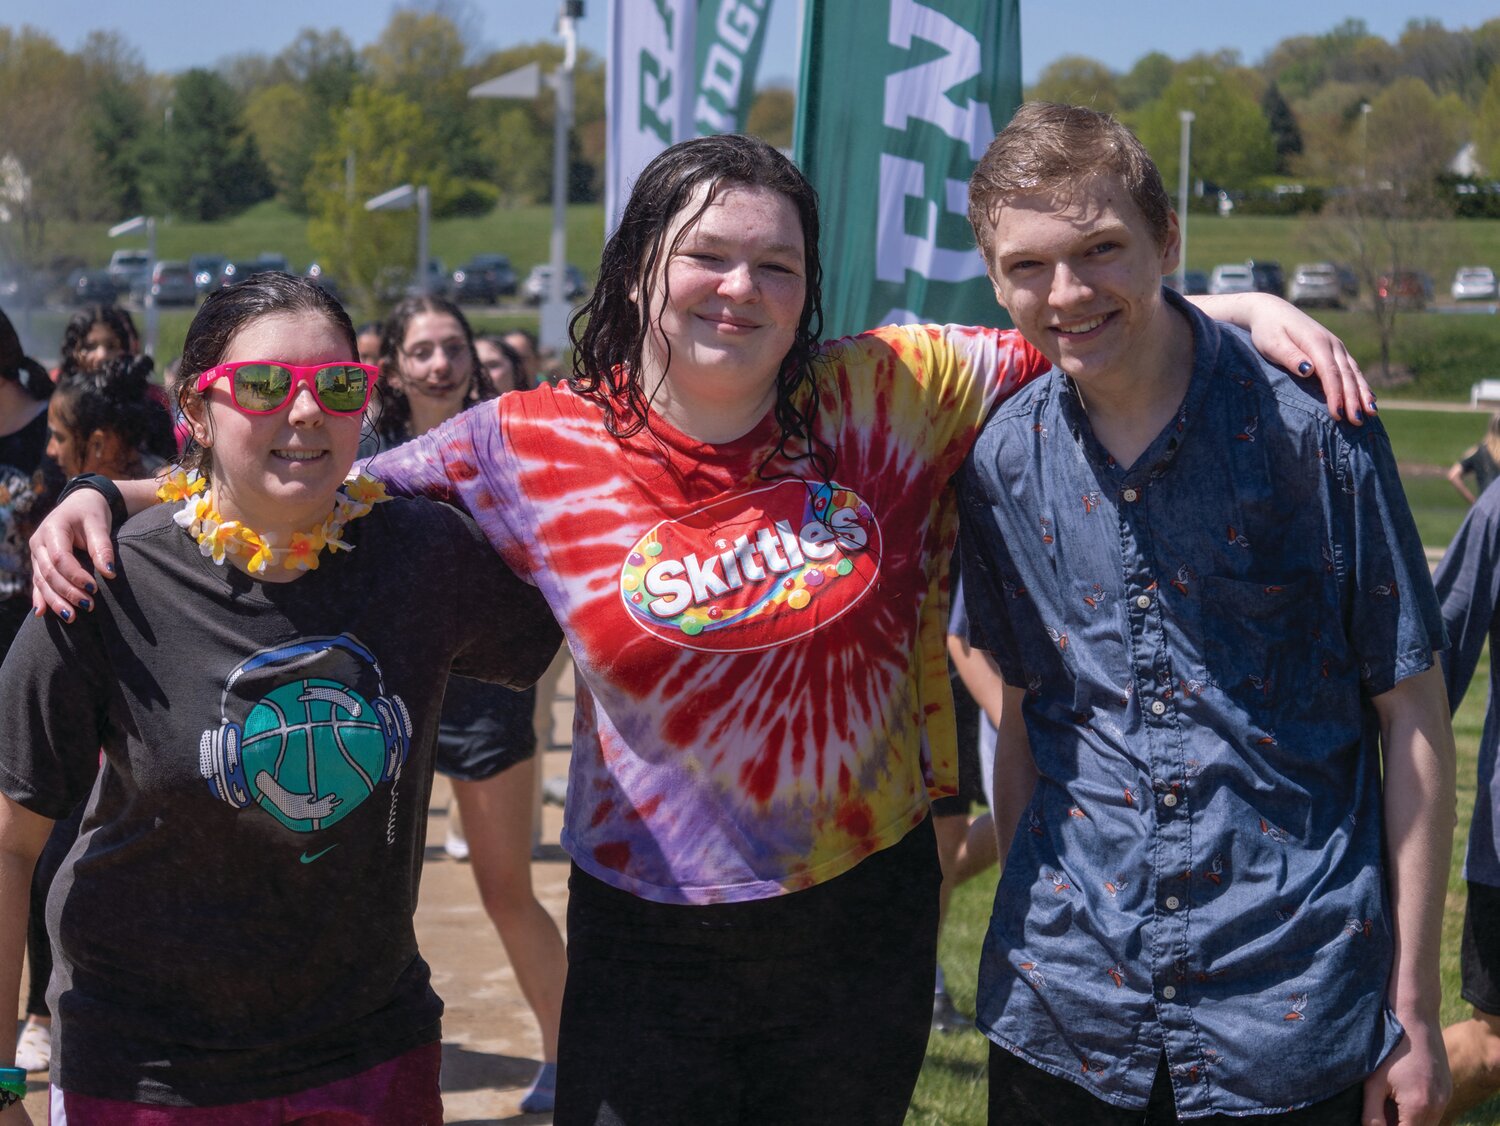 Students gather after getting wet at April Showers, hosted by the Unified Pennridge Club.